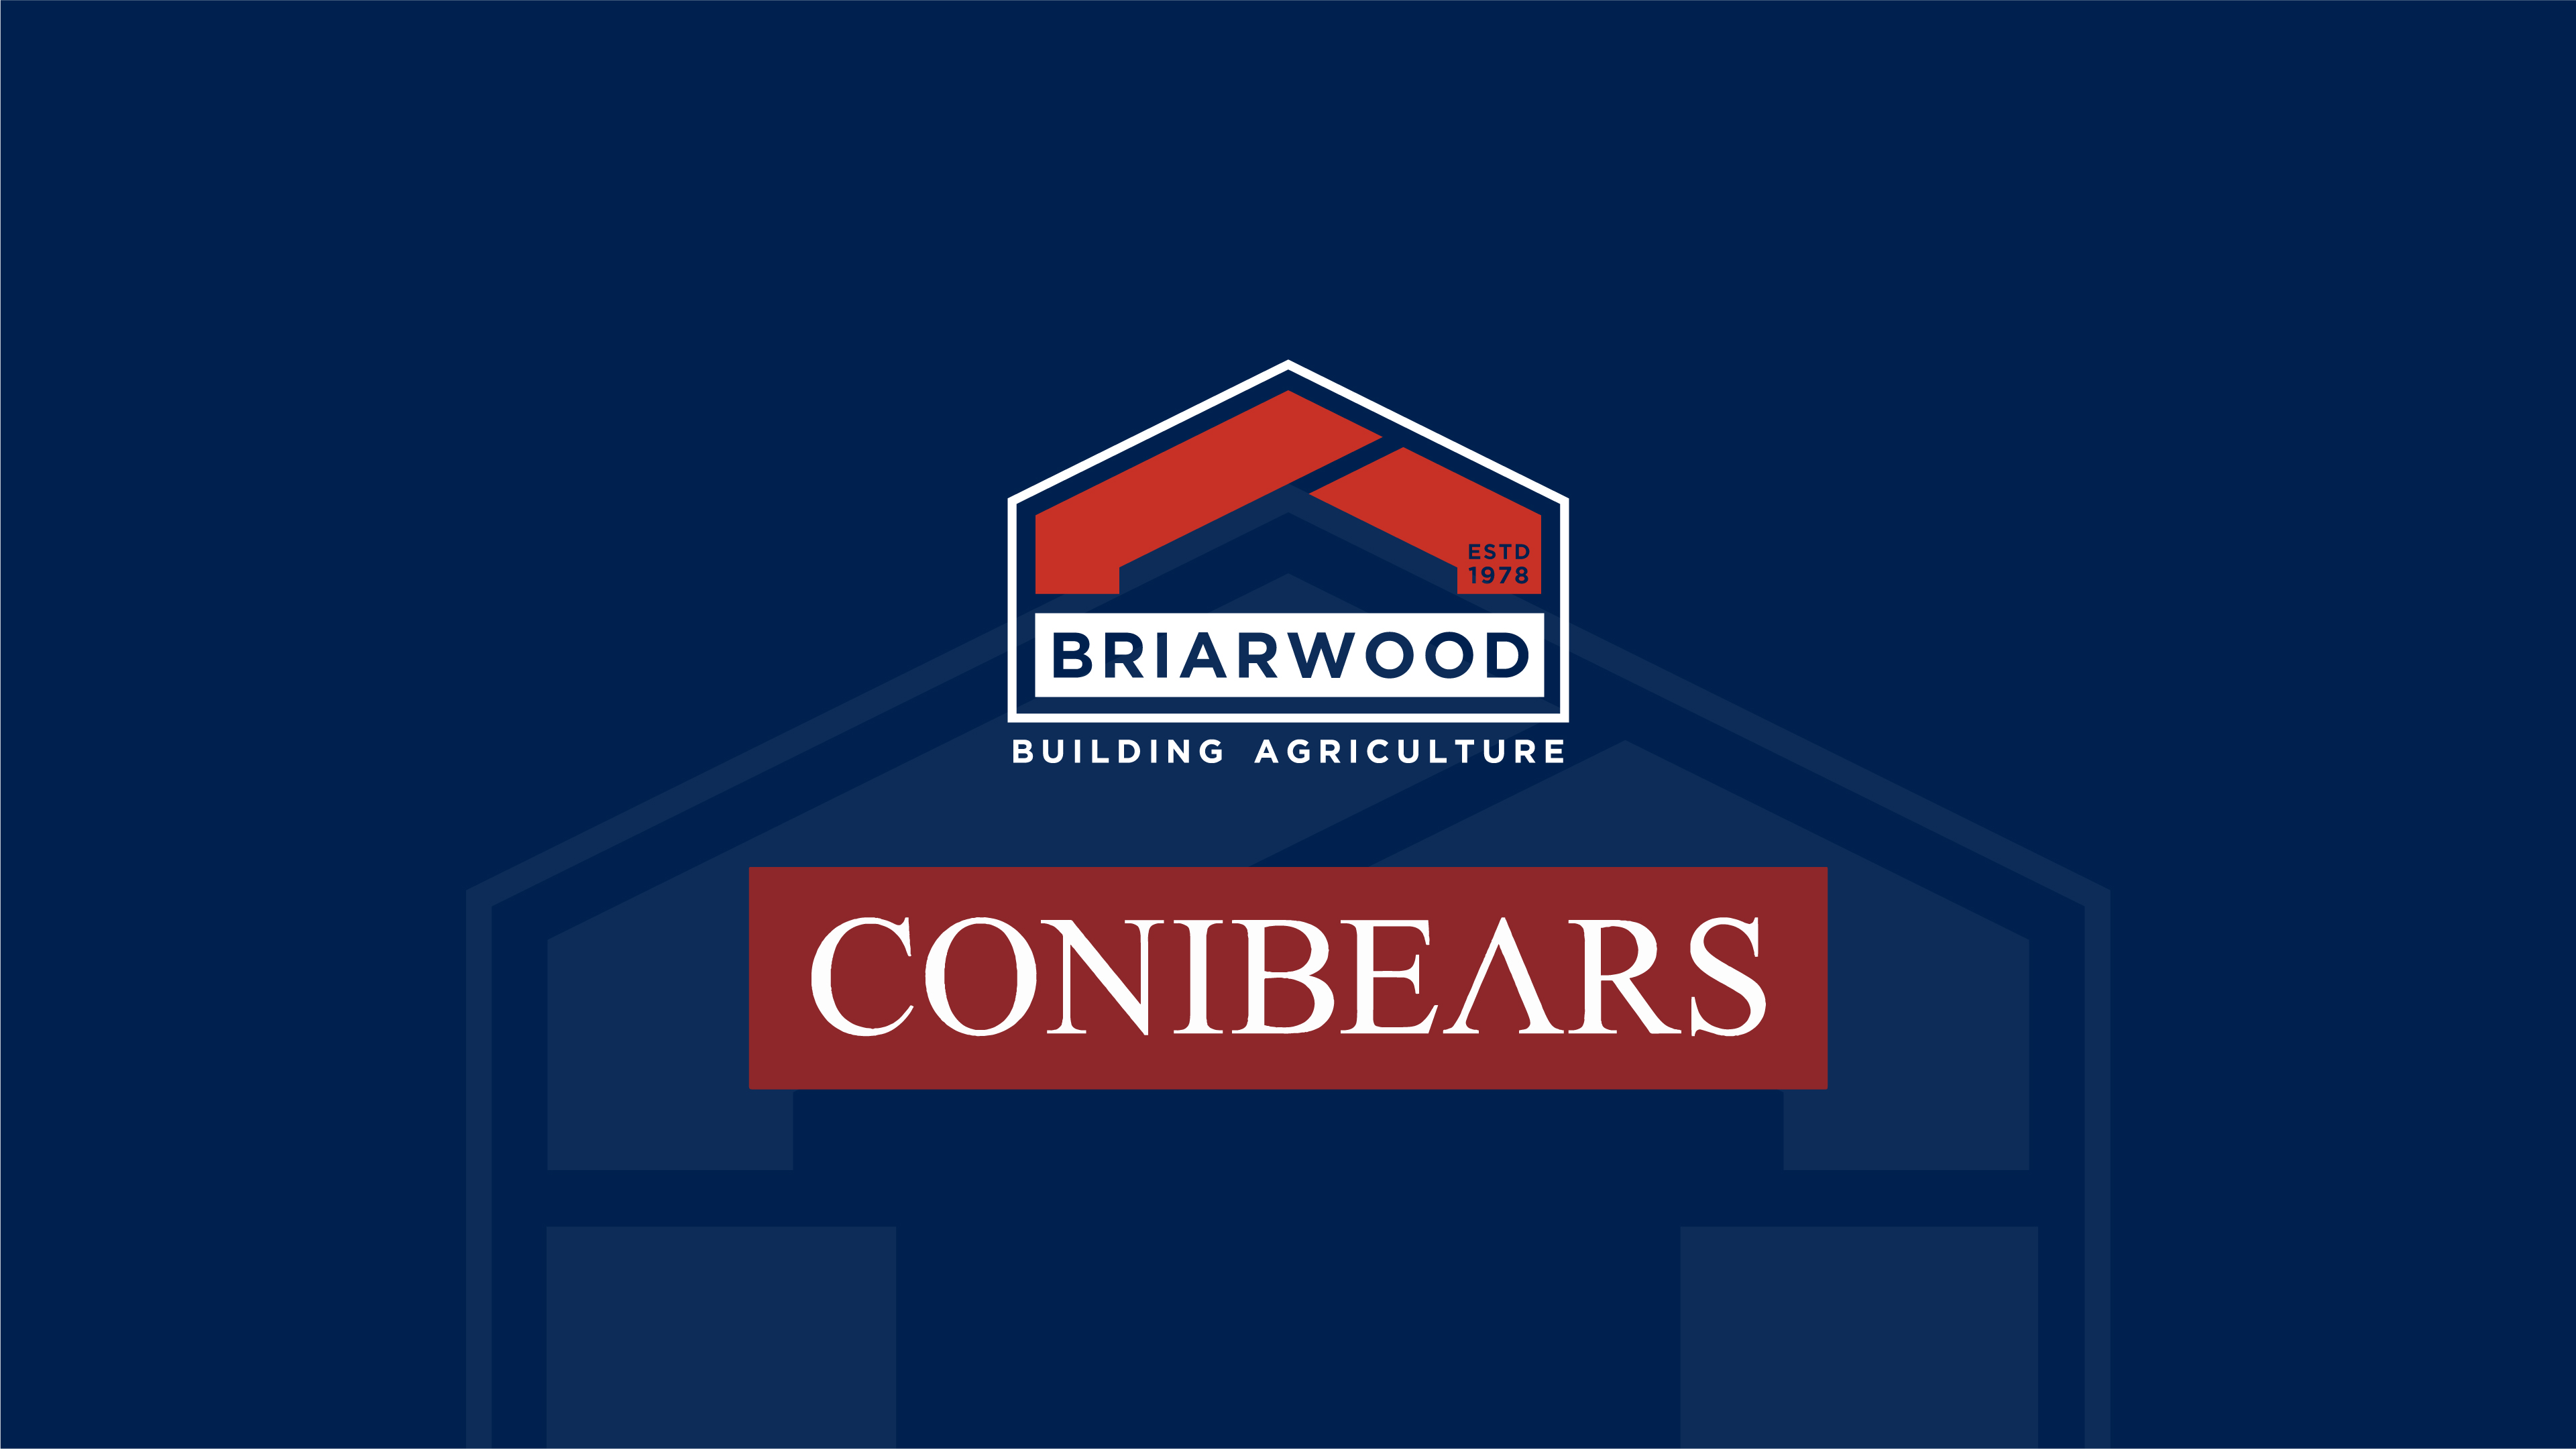 Conibears partners with Briarwood Products